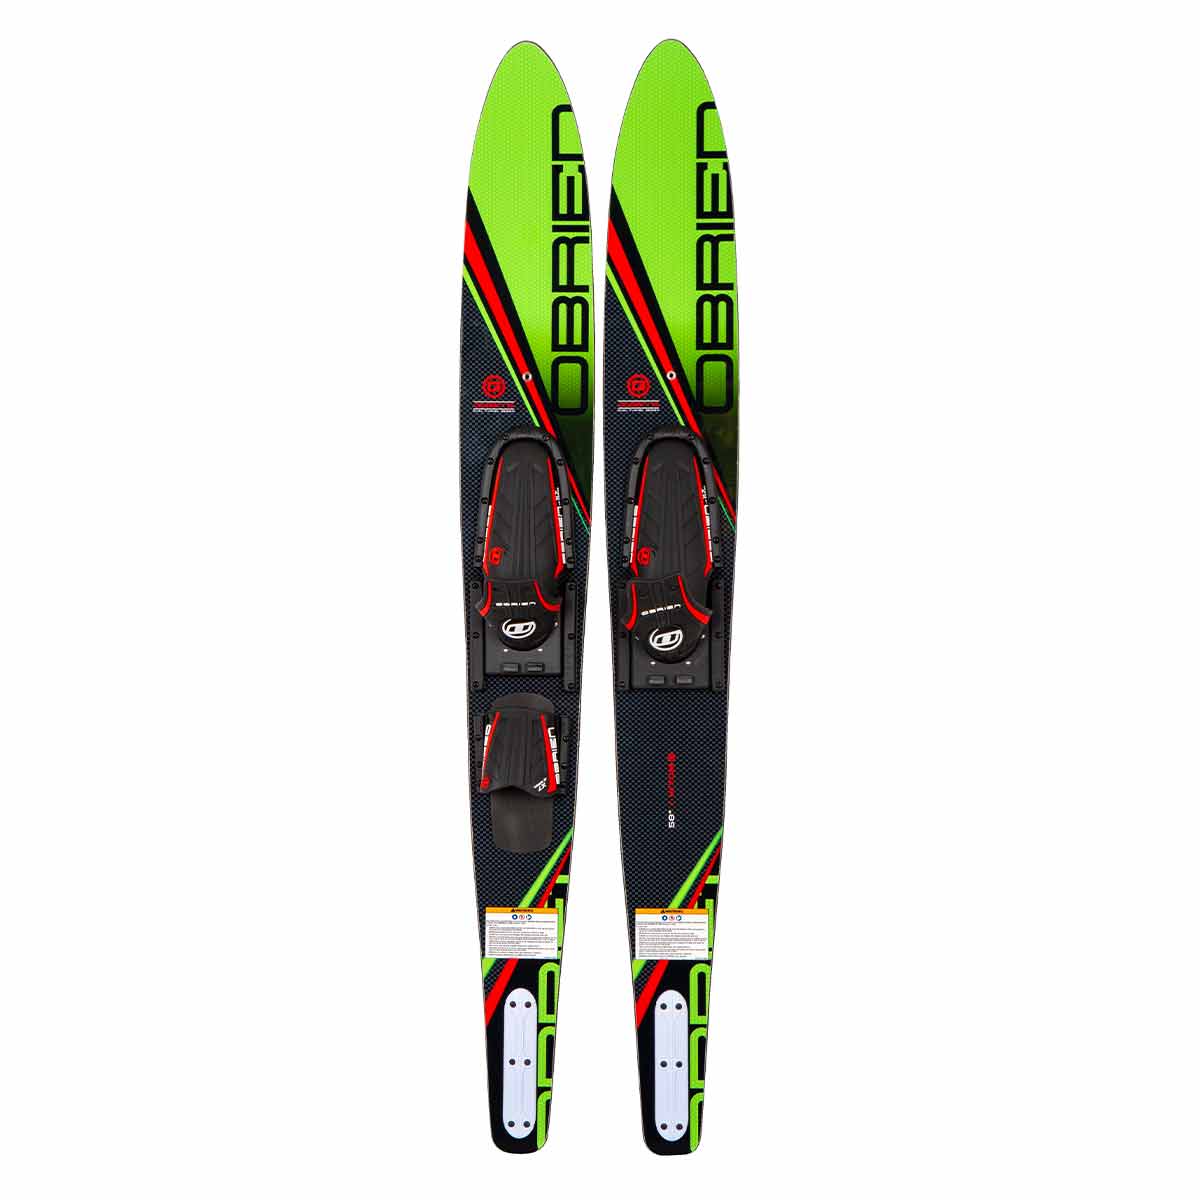 O'Brien Celebrity 58" Combo Water Skis - Green